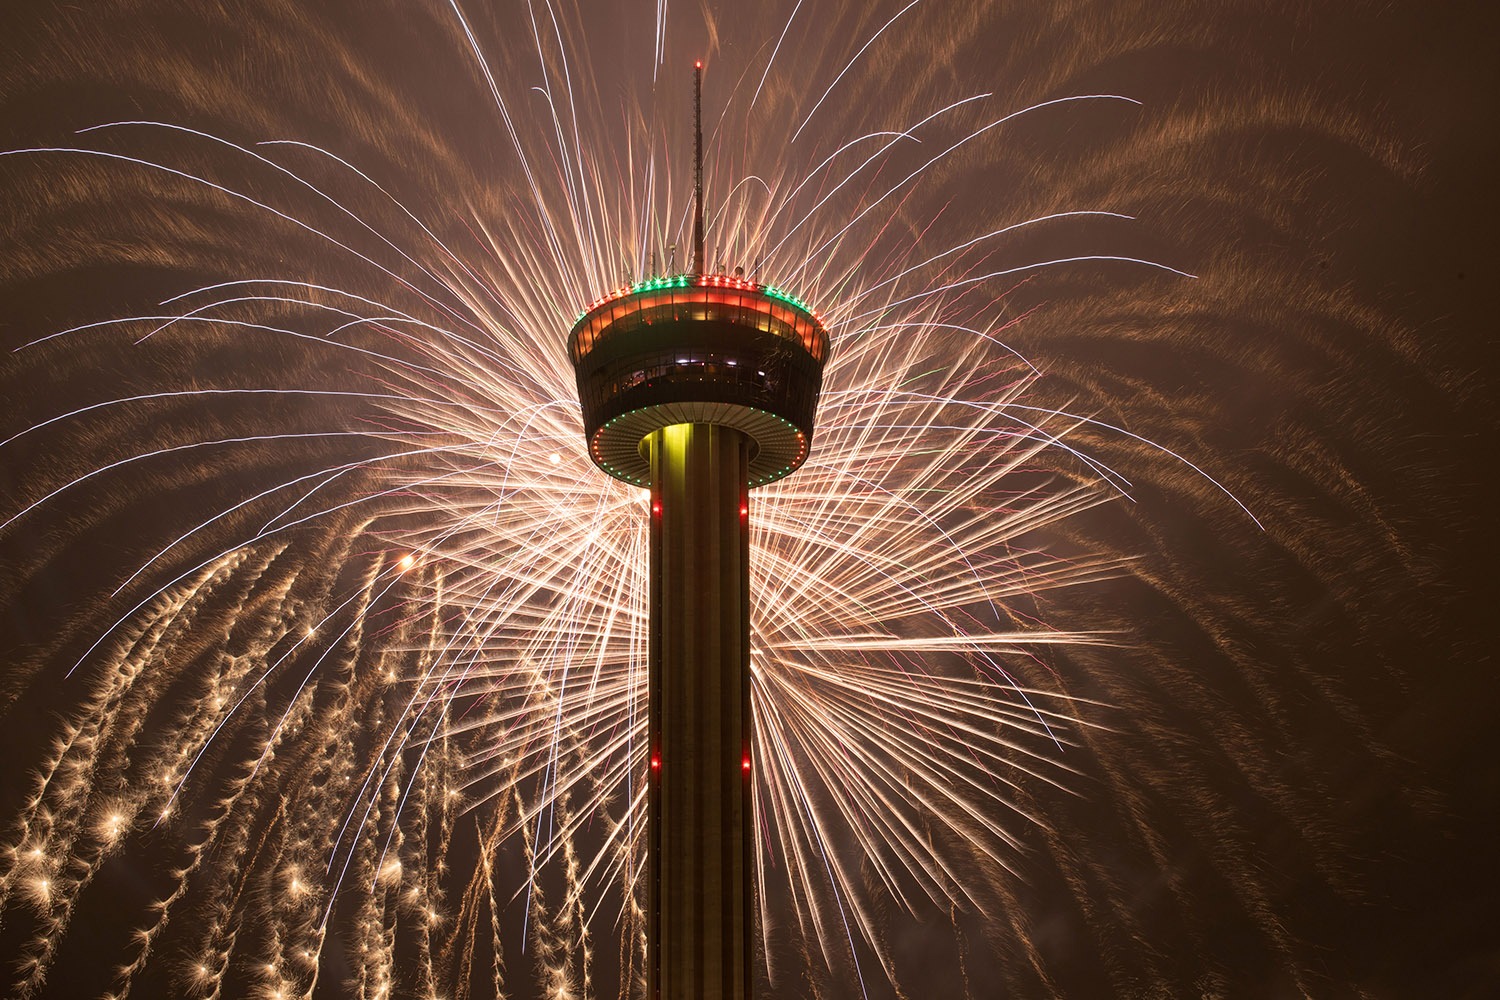 Dozens of fireworks exploded around the Tower of the America’s to ring in 2022 in San Antonio,Texas, on Jan. 1, 2022. (Kaylee Greenlee / San Antonio Heron)